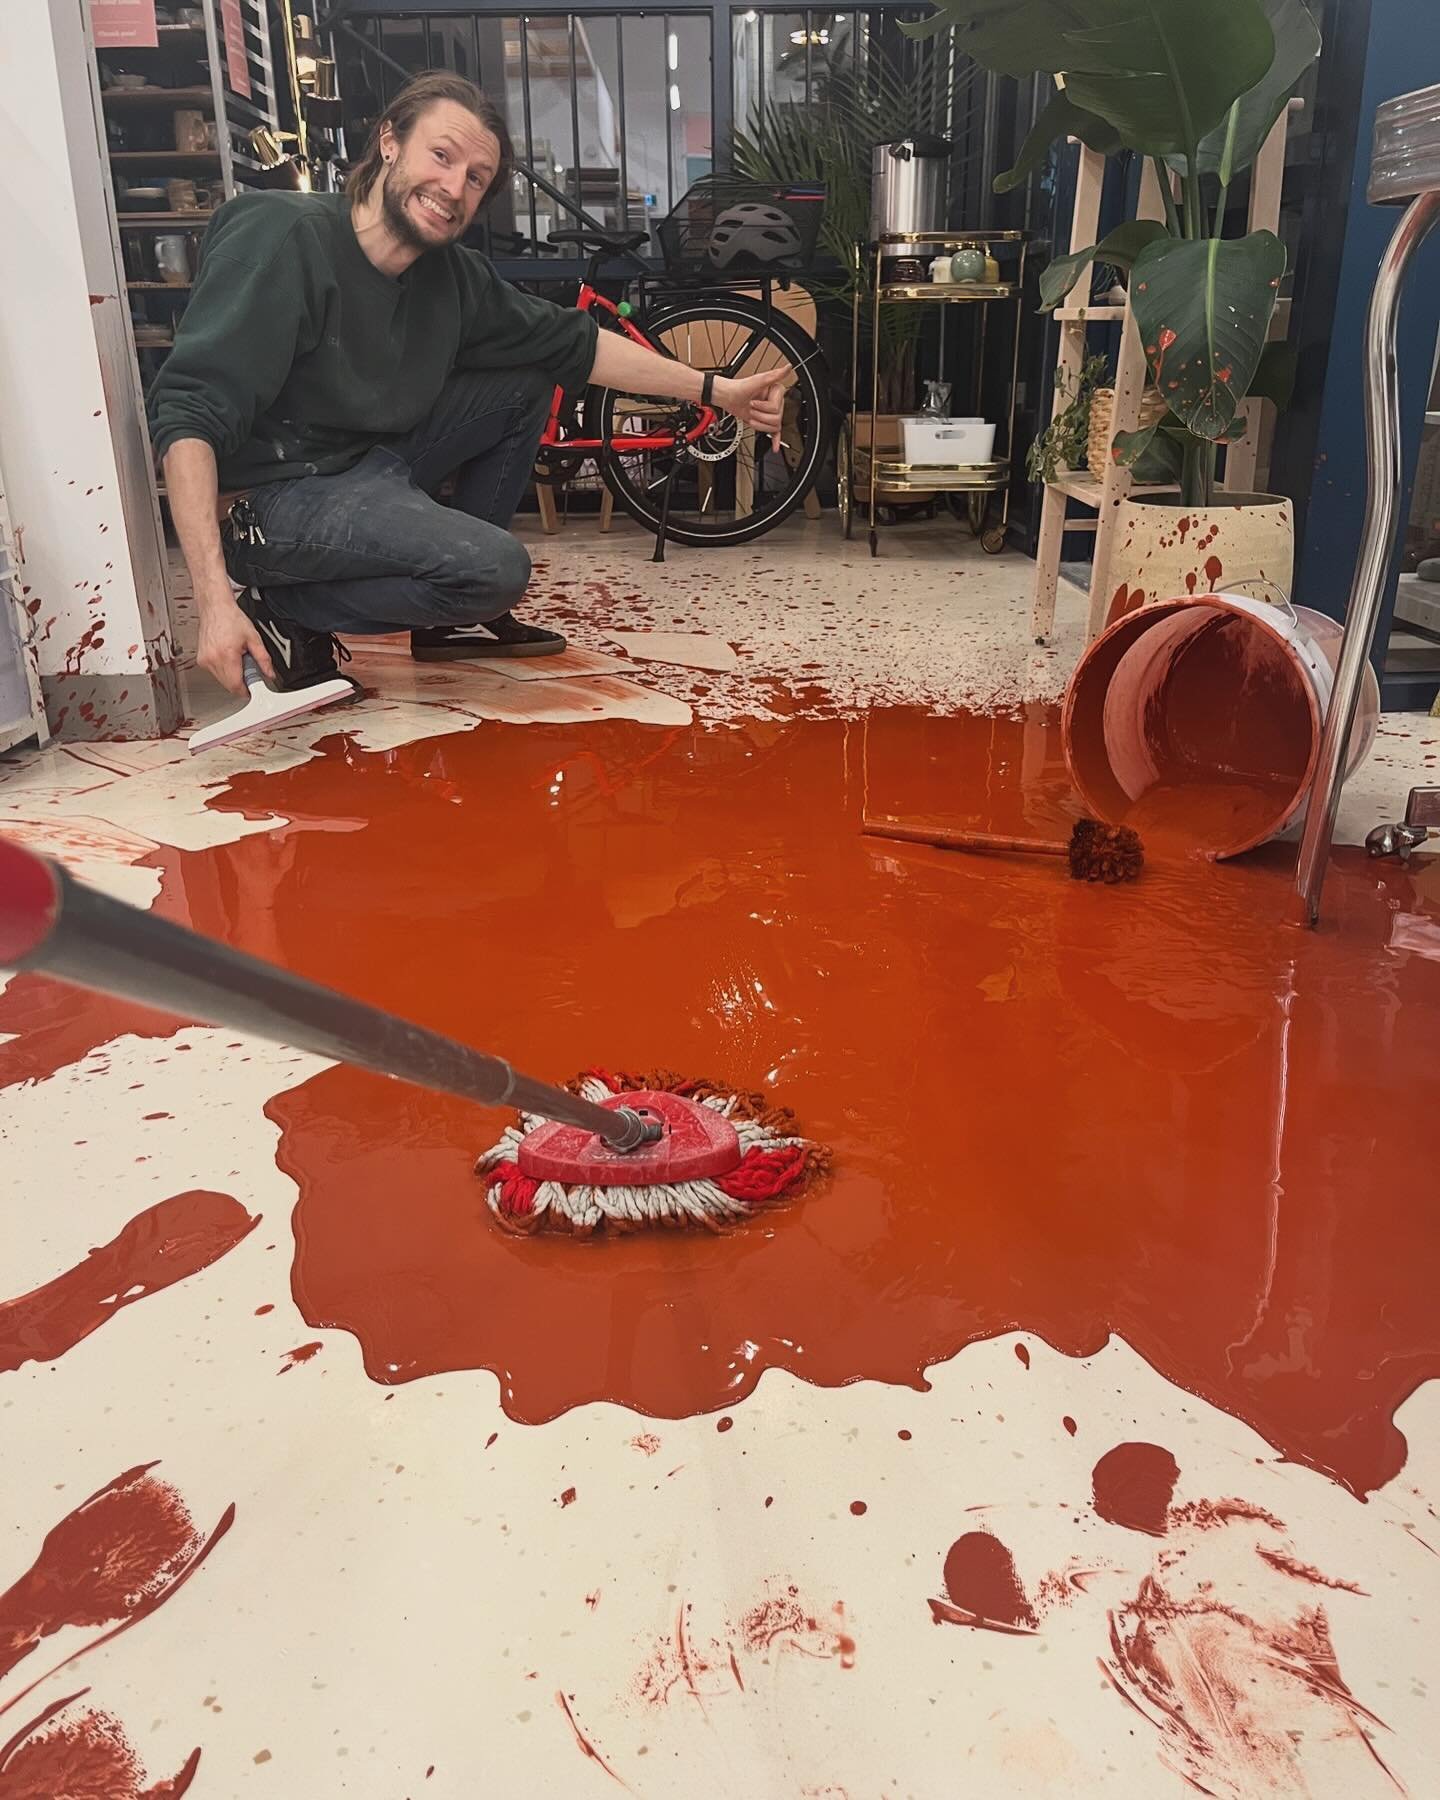 Gotta say, I don&rsquo;t recommend dropping 3 gallons of randy&rsquo;s red on the floor minutes before projecting @canadianpotteryshow at the studio 🫠🫠🫠

On the plus side episode one was fab!! Can&rsquo;t wait till next week 😄